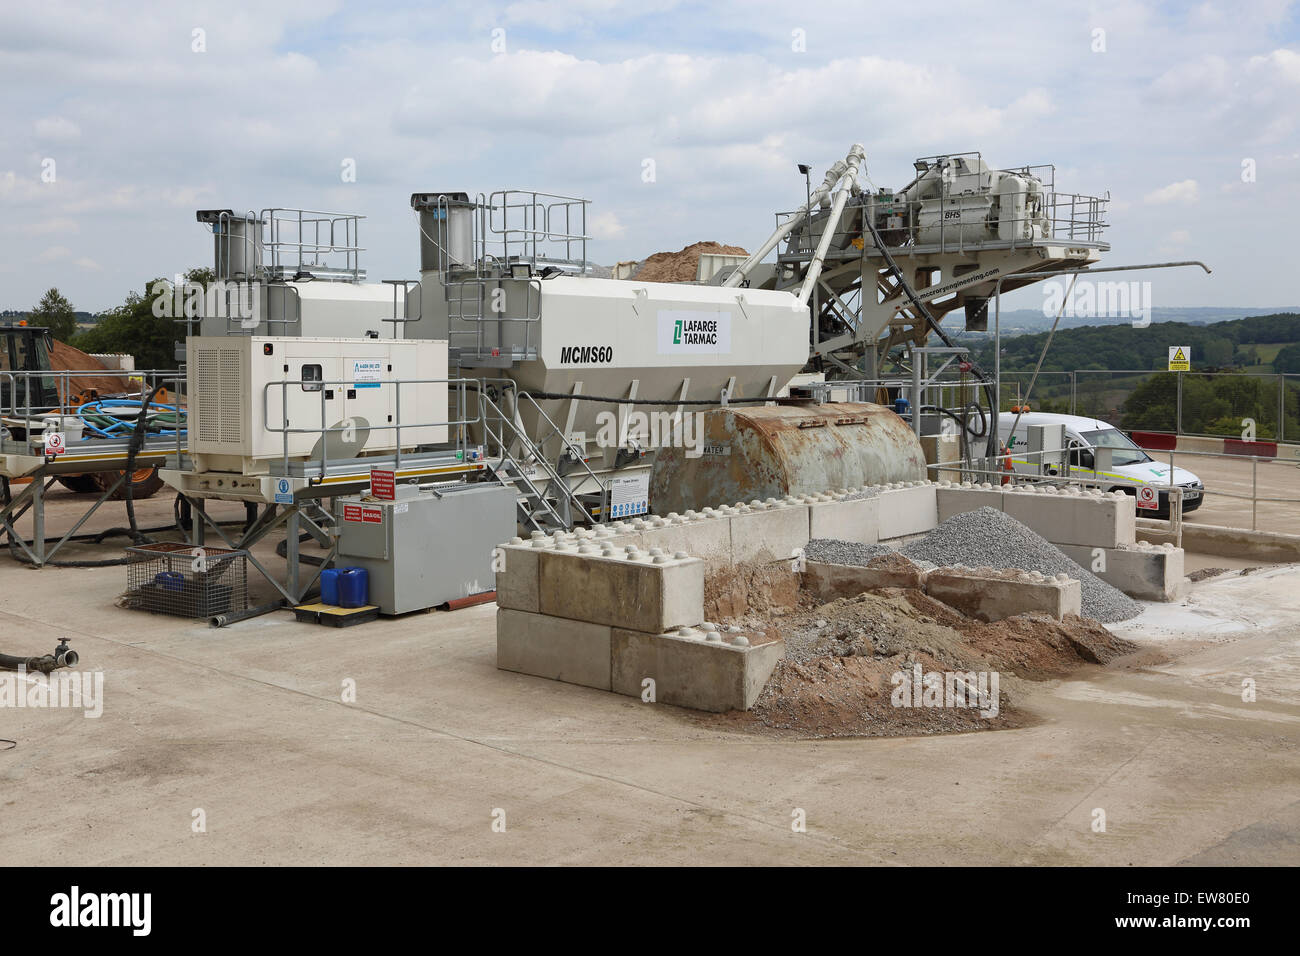 An on-site concrete batching plant on a large rural construction site Stock Photo